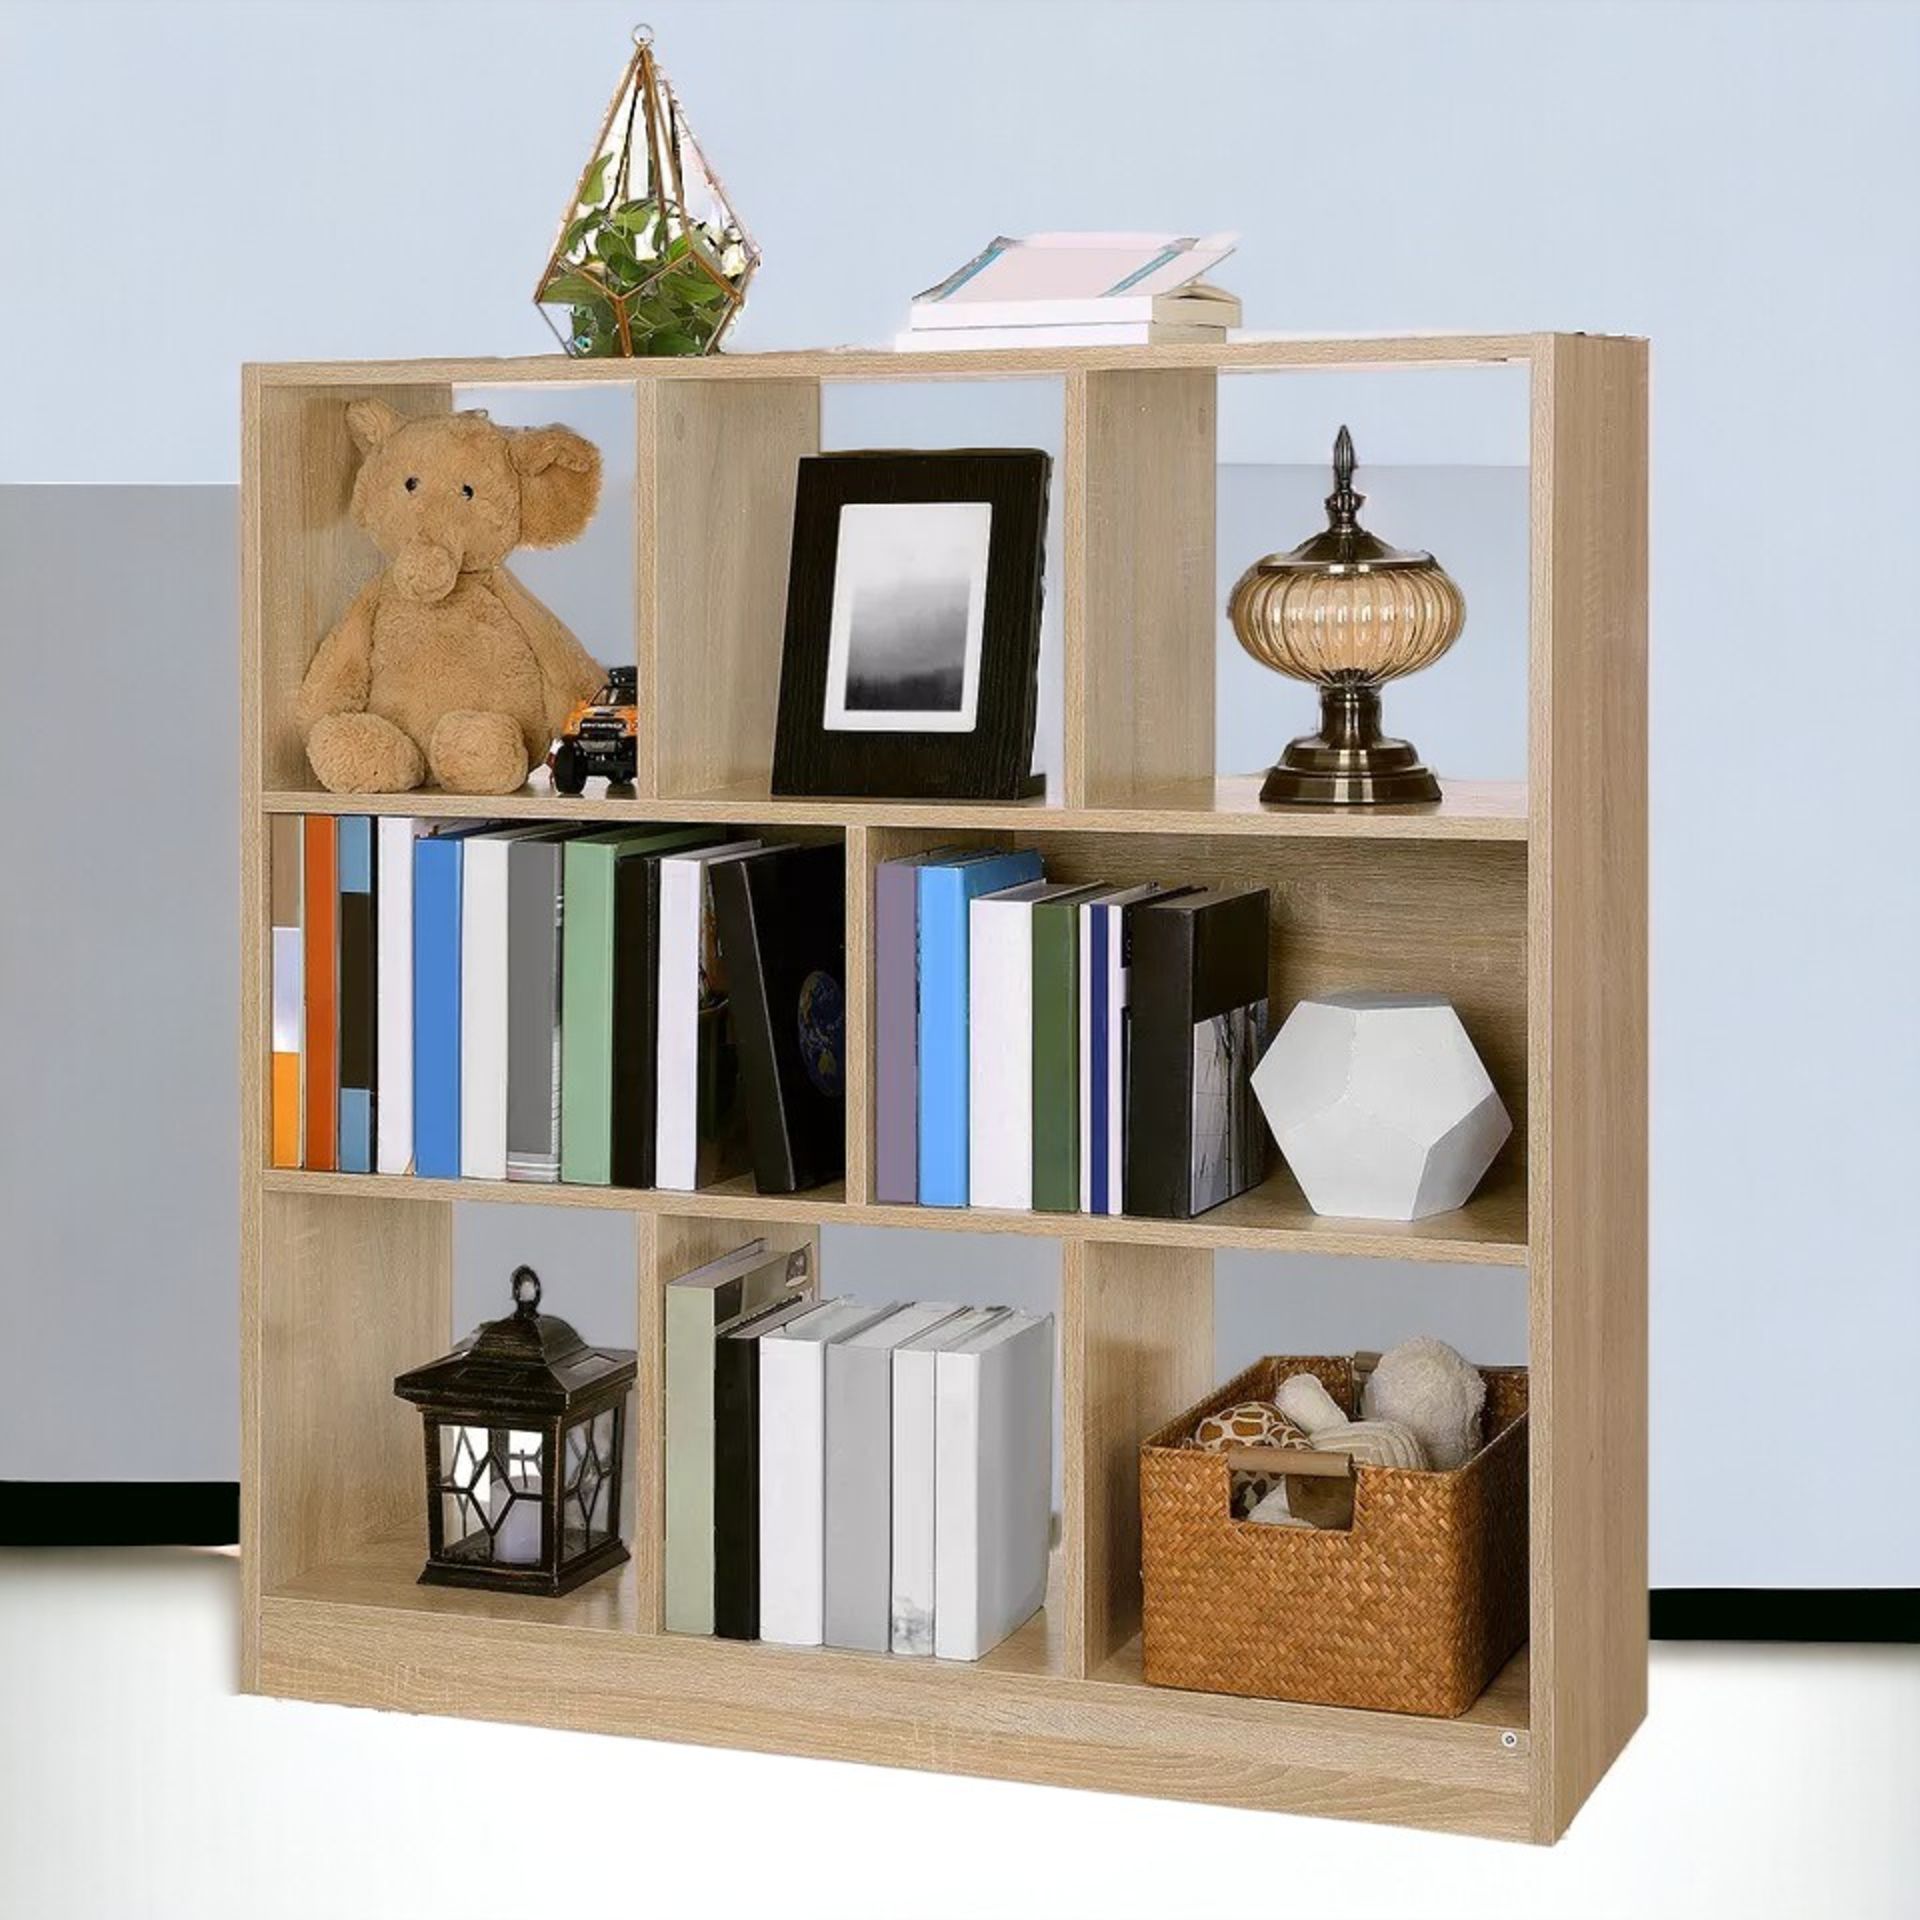 FREE DELIVERY - BRAND NEW VASAGLE BOOKSHELF,WOODEN BOOKCASE OPEN CUBBIES,97.5X30X100CM, - Image 2 of 2